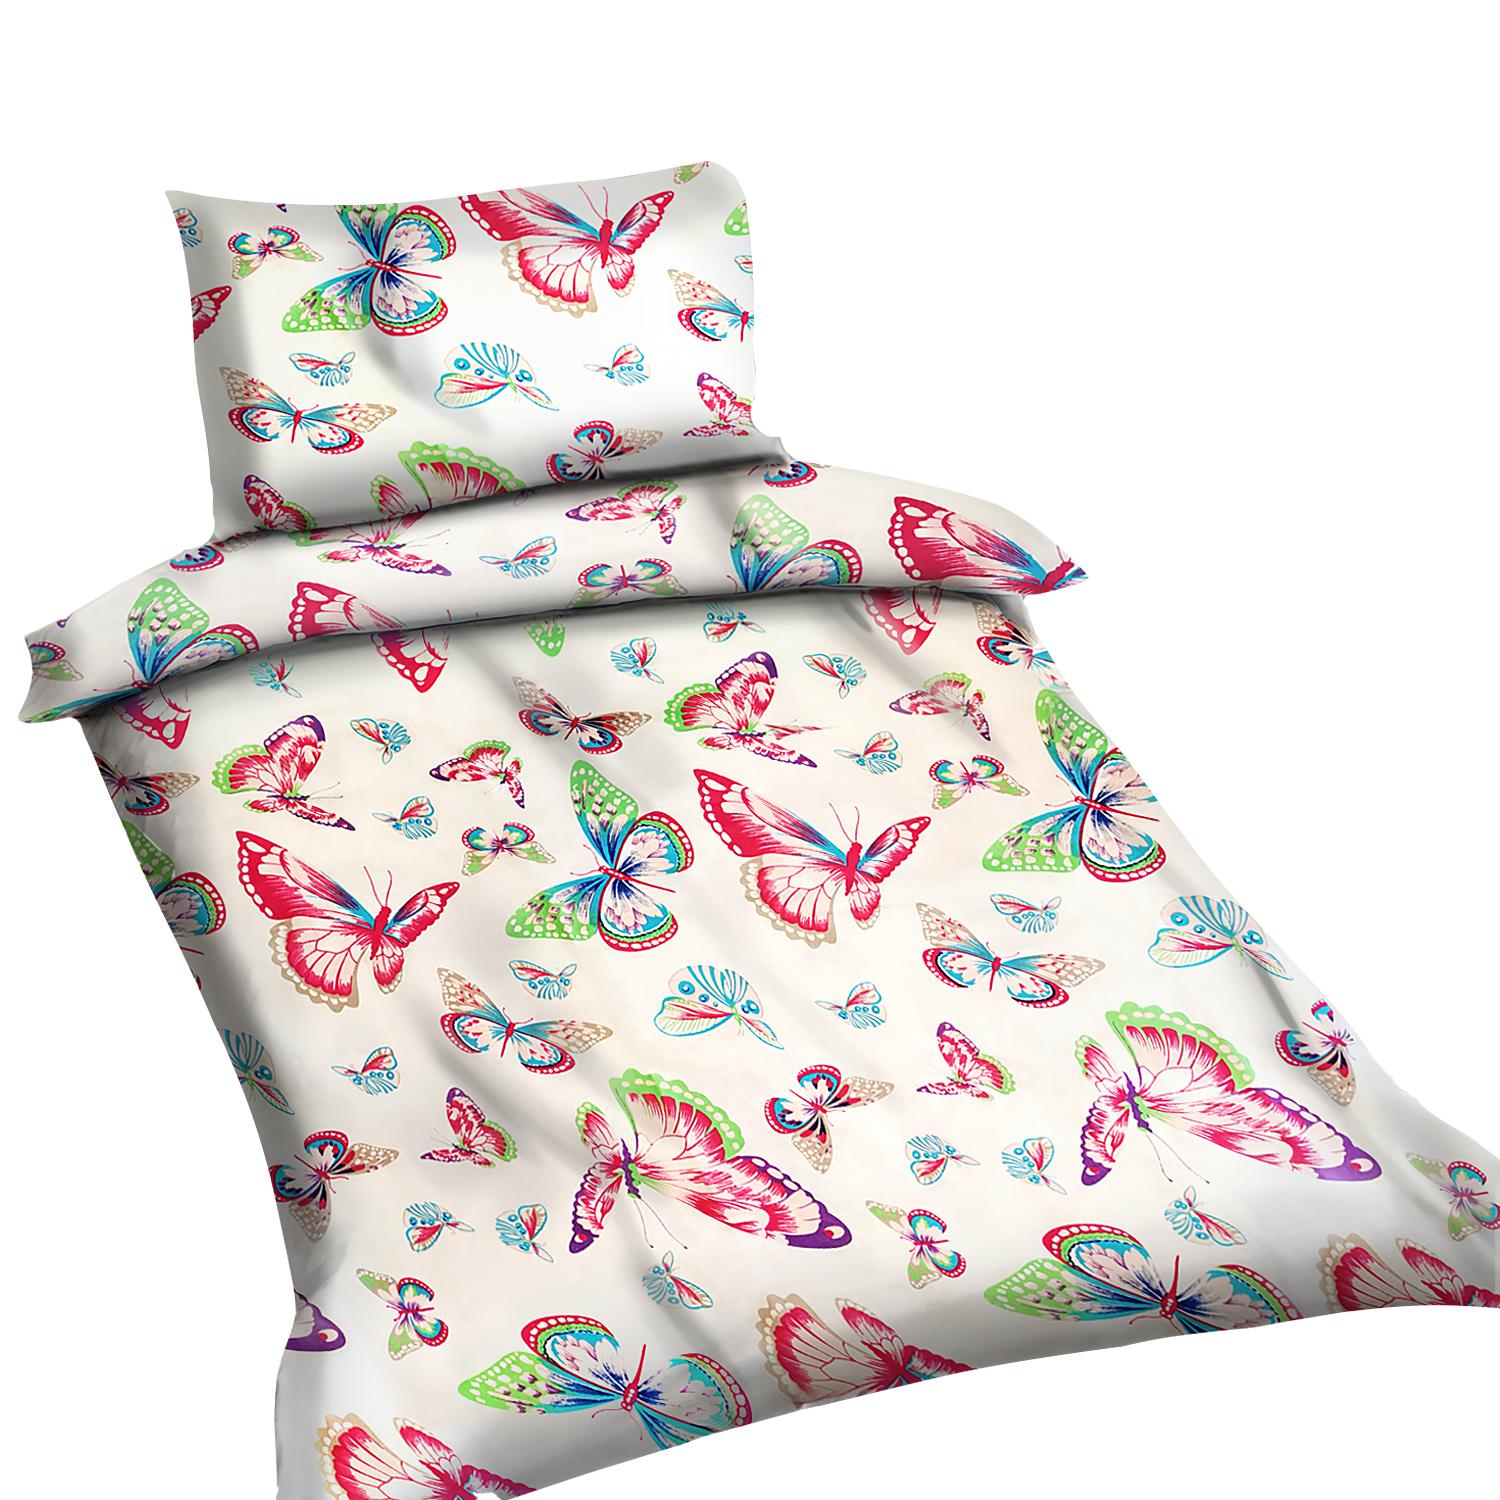 Set of children's bedding 90x120cm - color butterfly